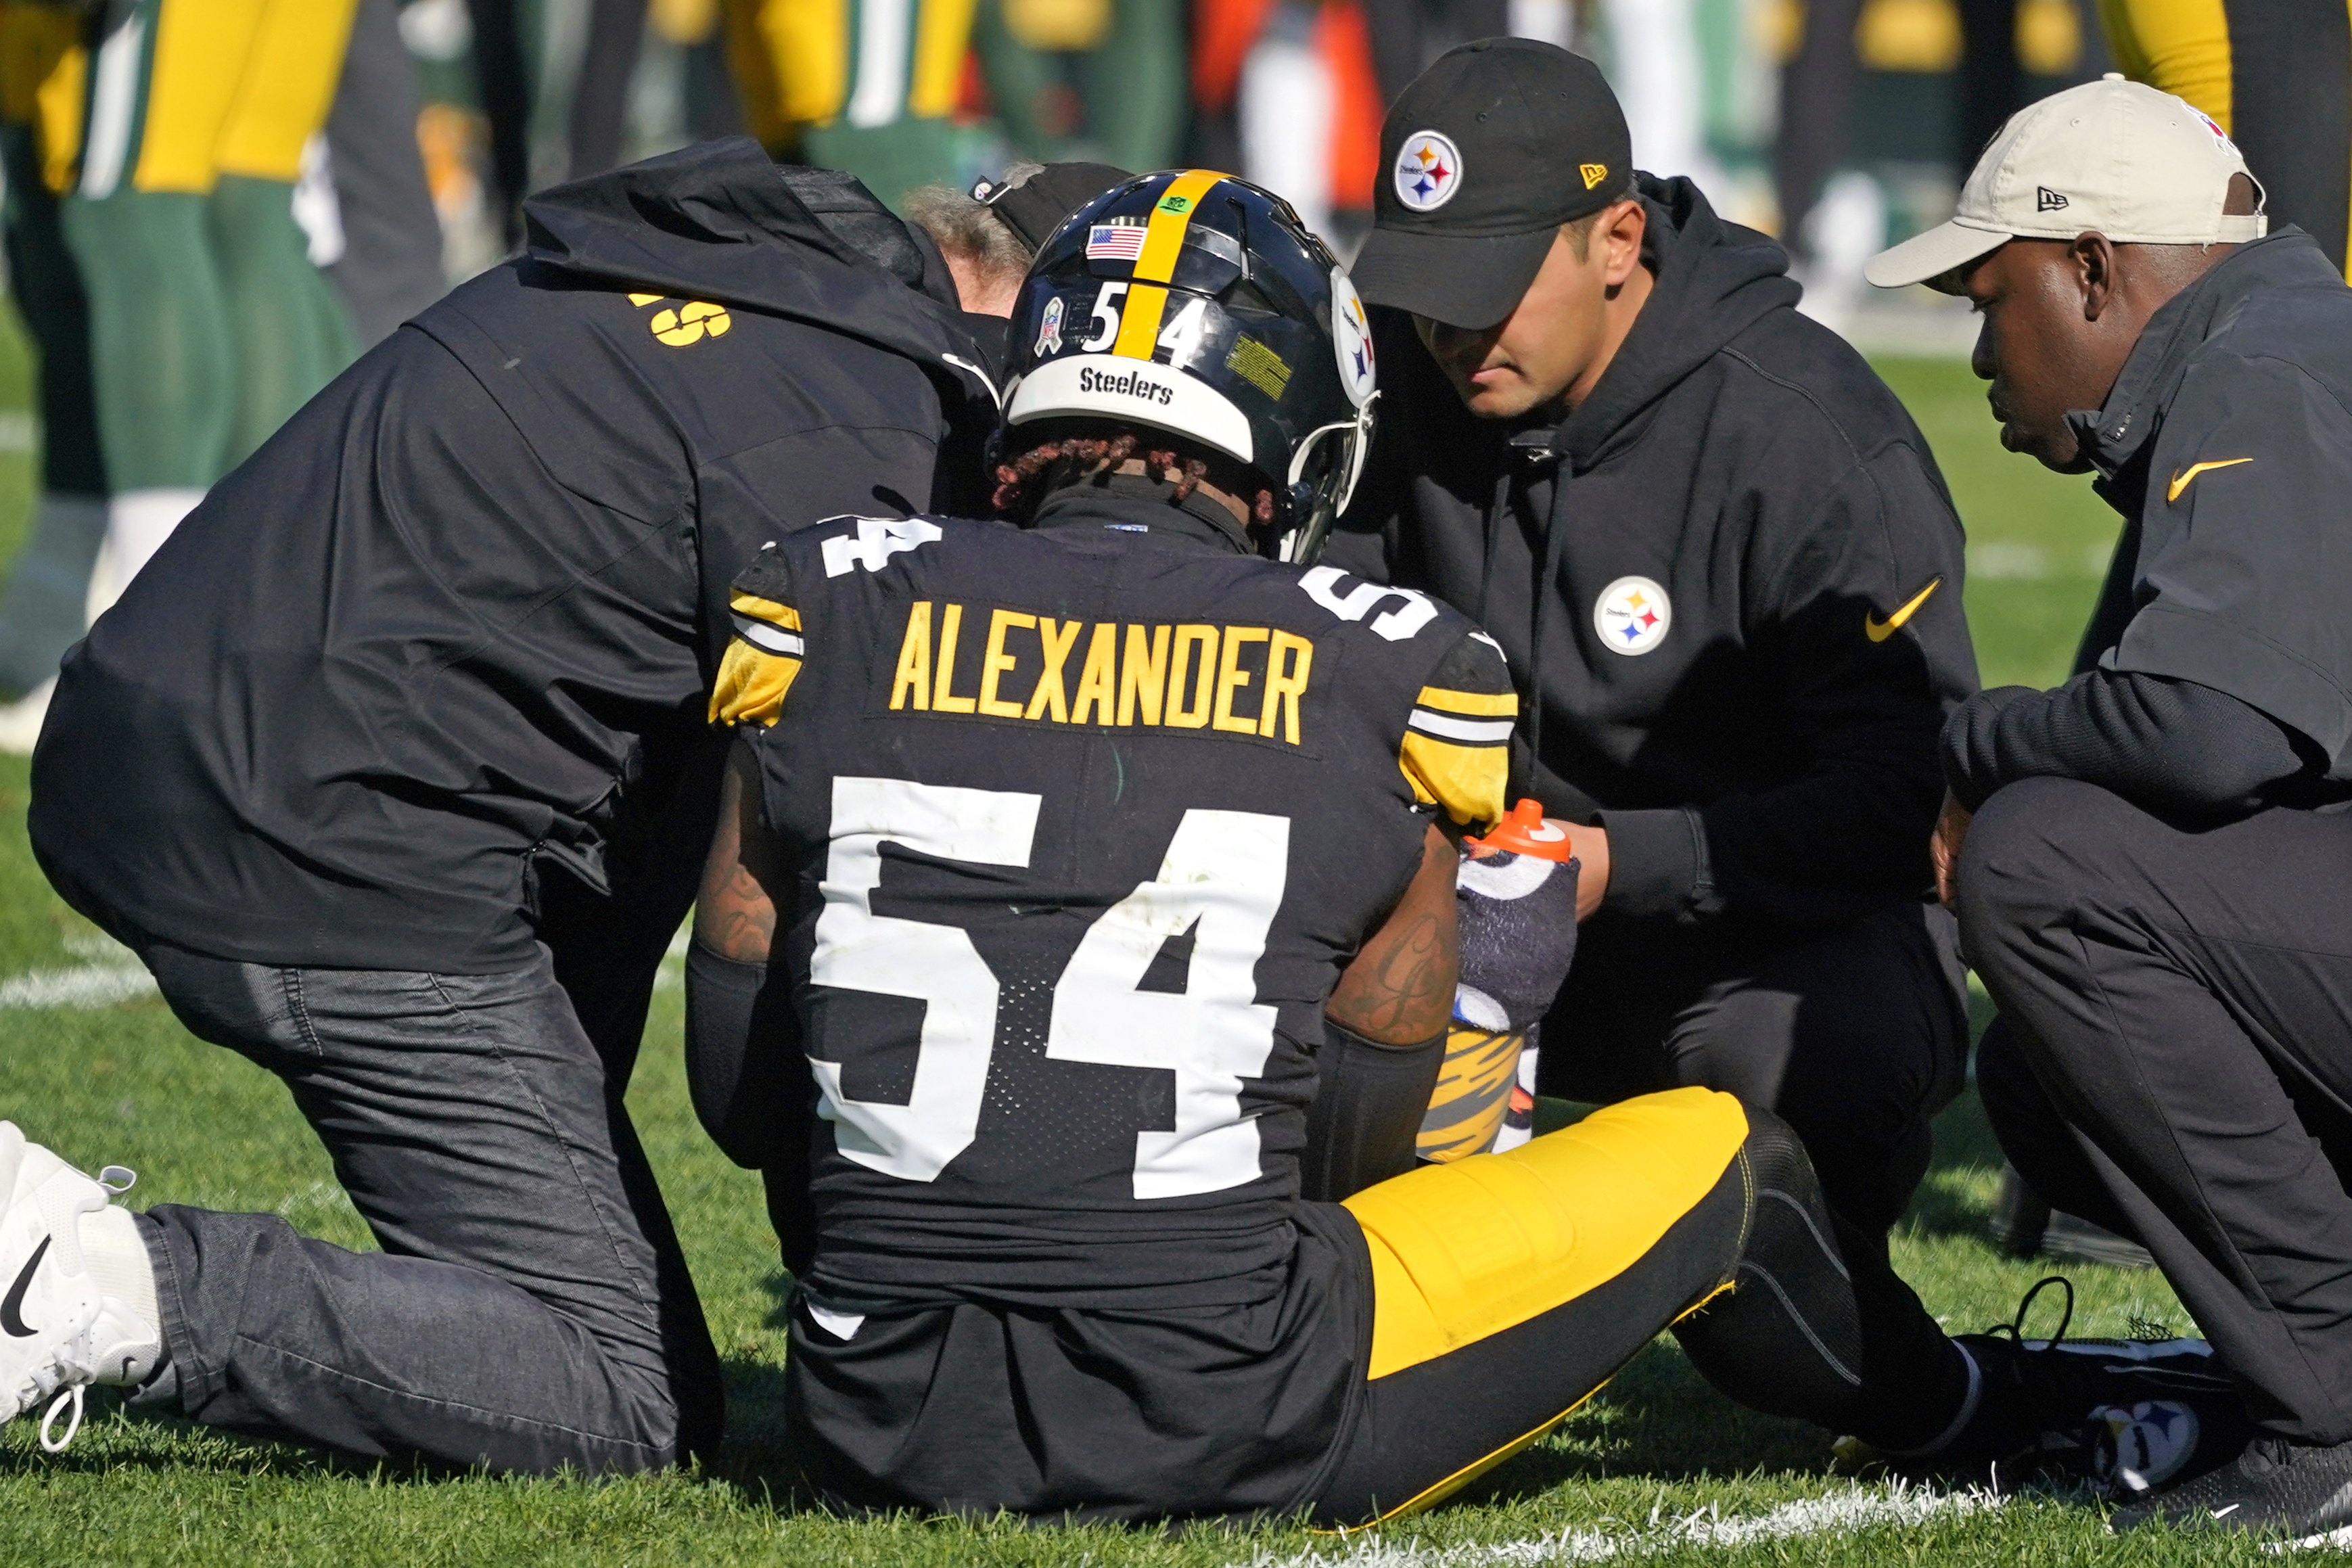 Steelers defense takes another major hit with loss of LB Kwon Alexander to  "serious" leg injury | AP News